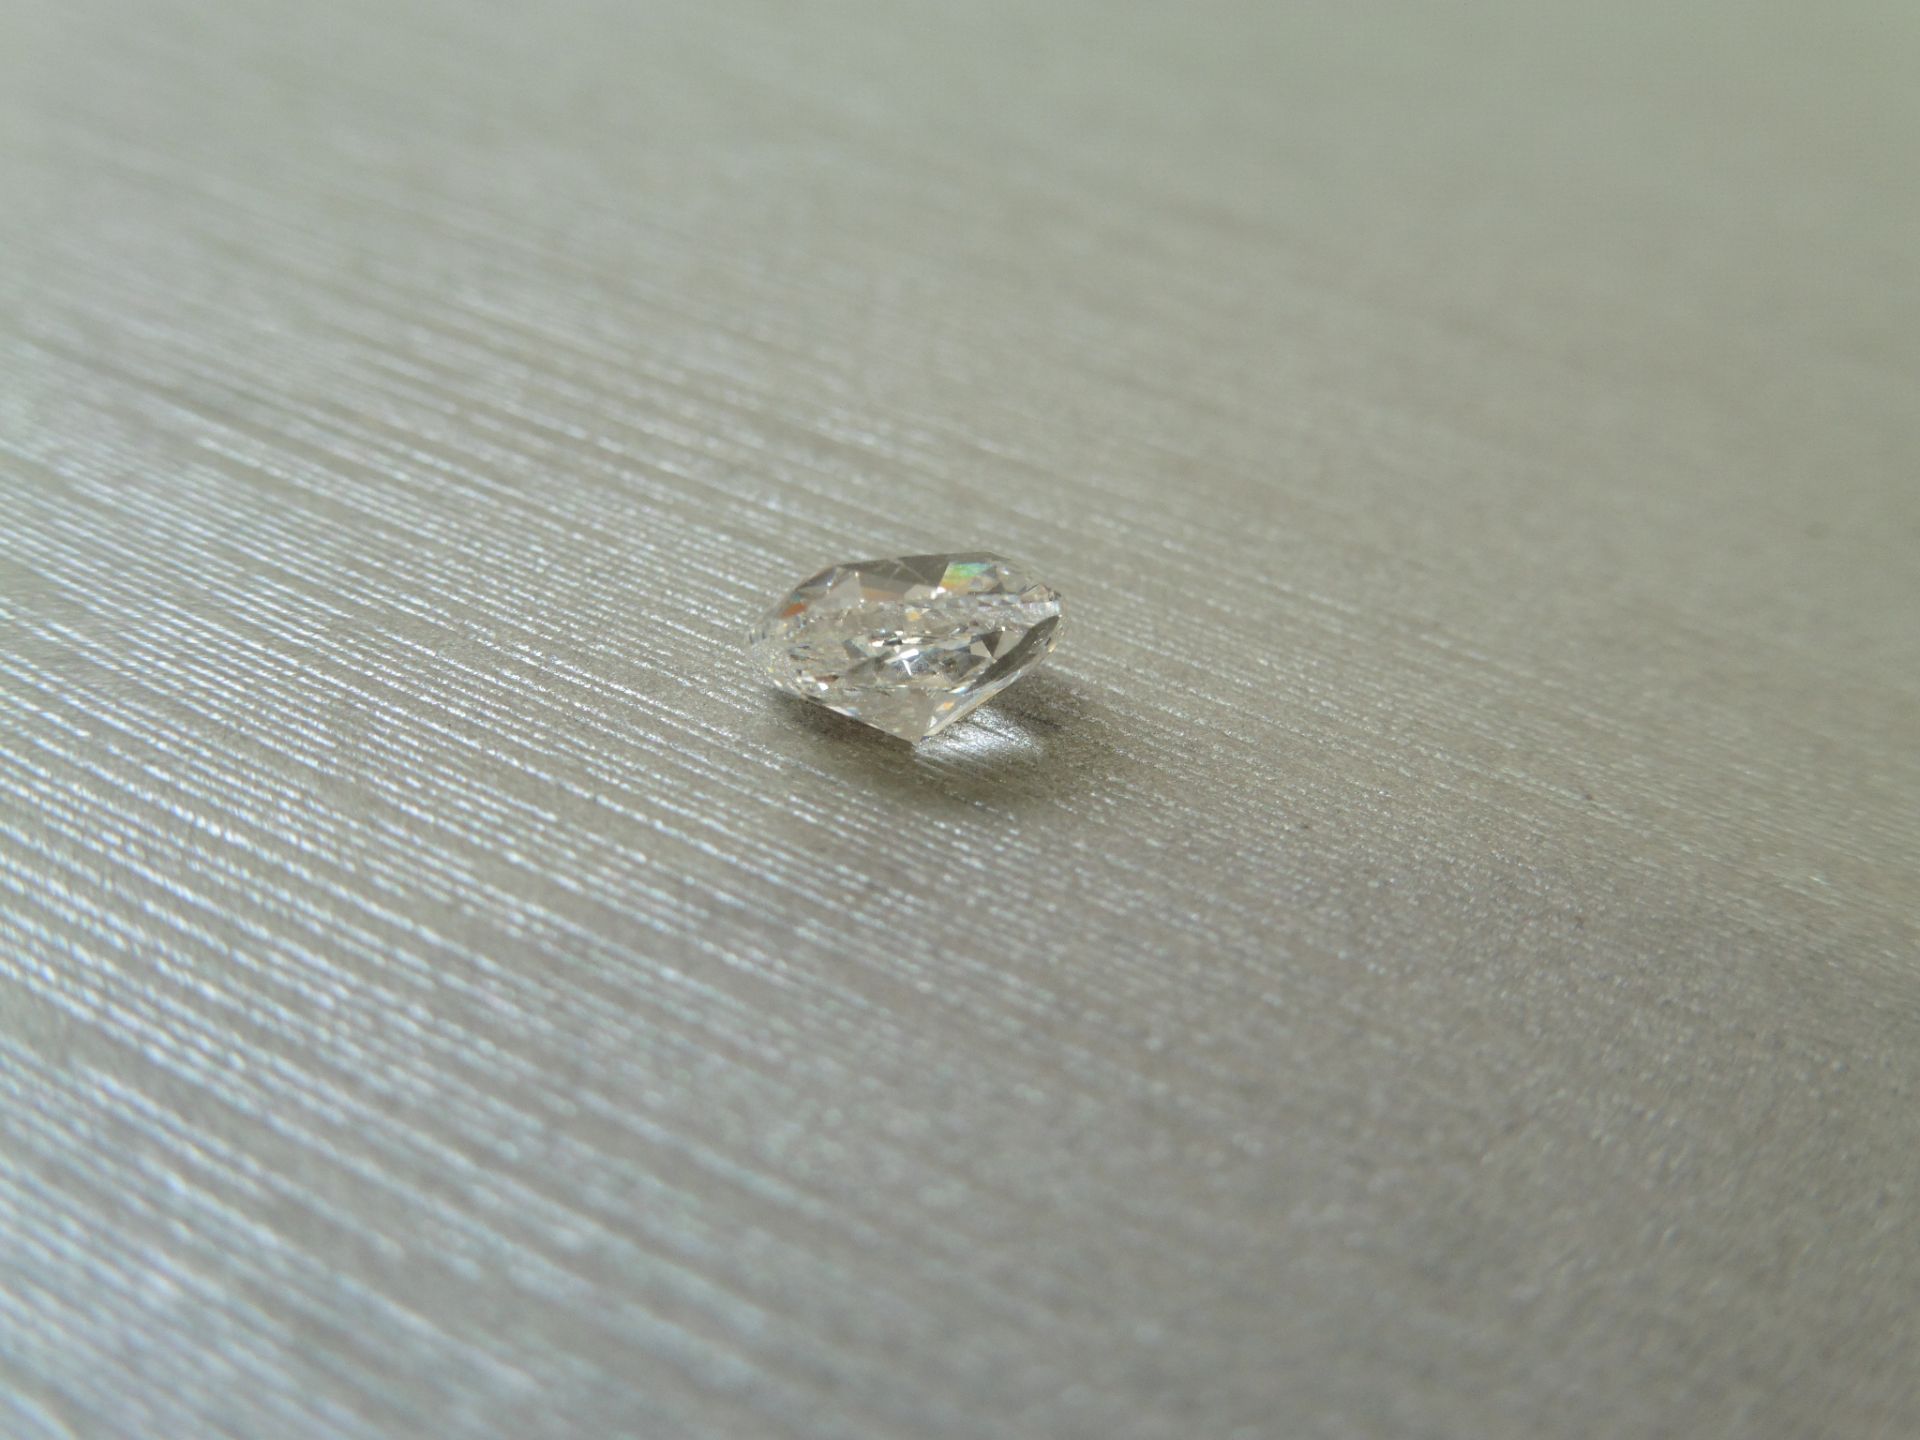 1.01ct single cushion cut diamond. Measurements 6.41 x 5.29 x 3.57mm. F colour and Si2 clarity. - Image 3 of 5